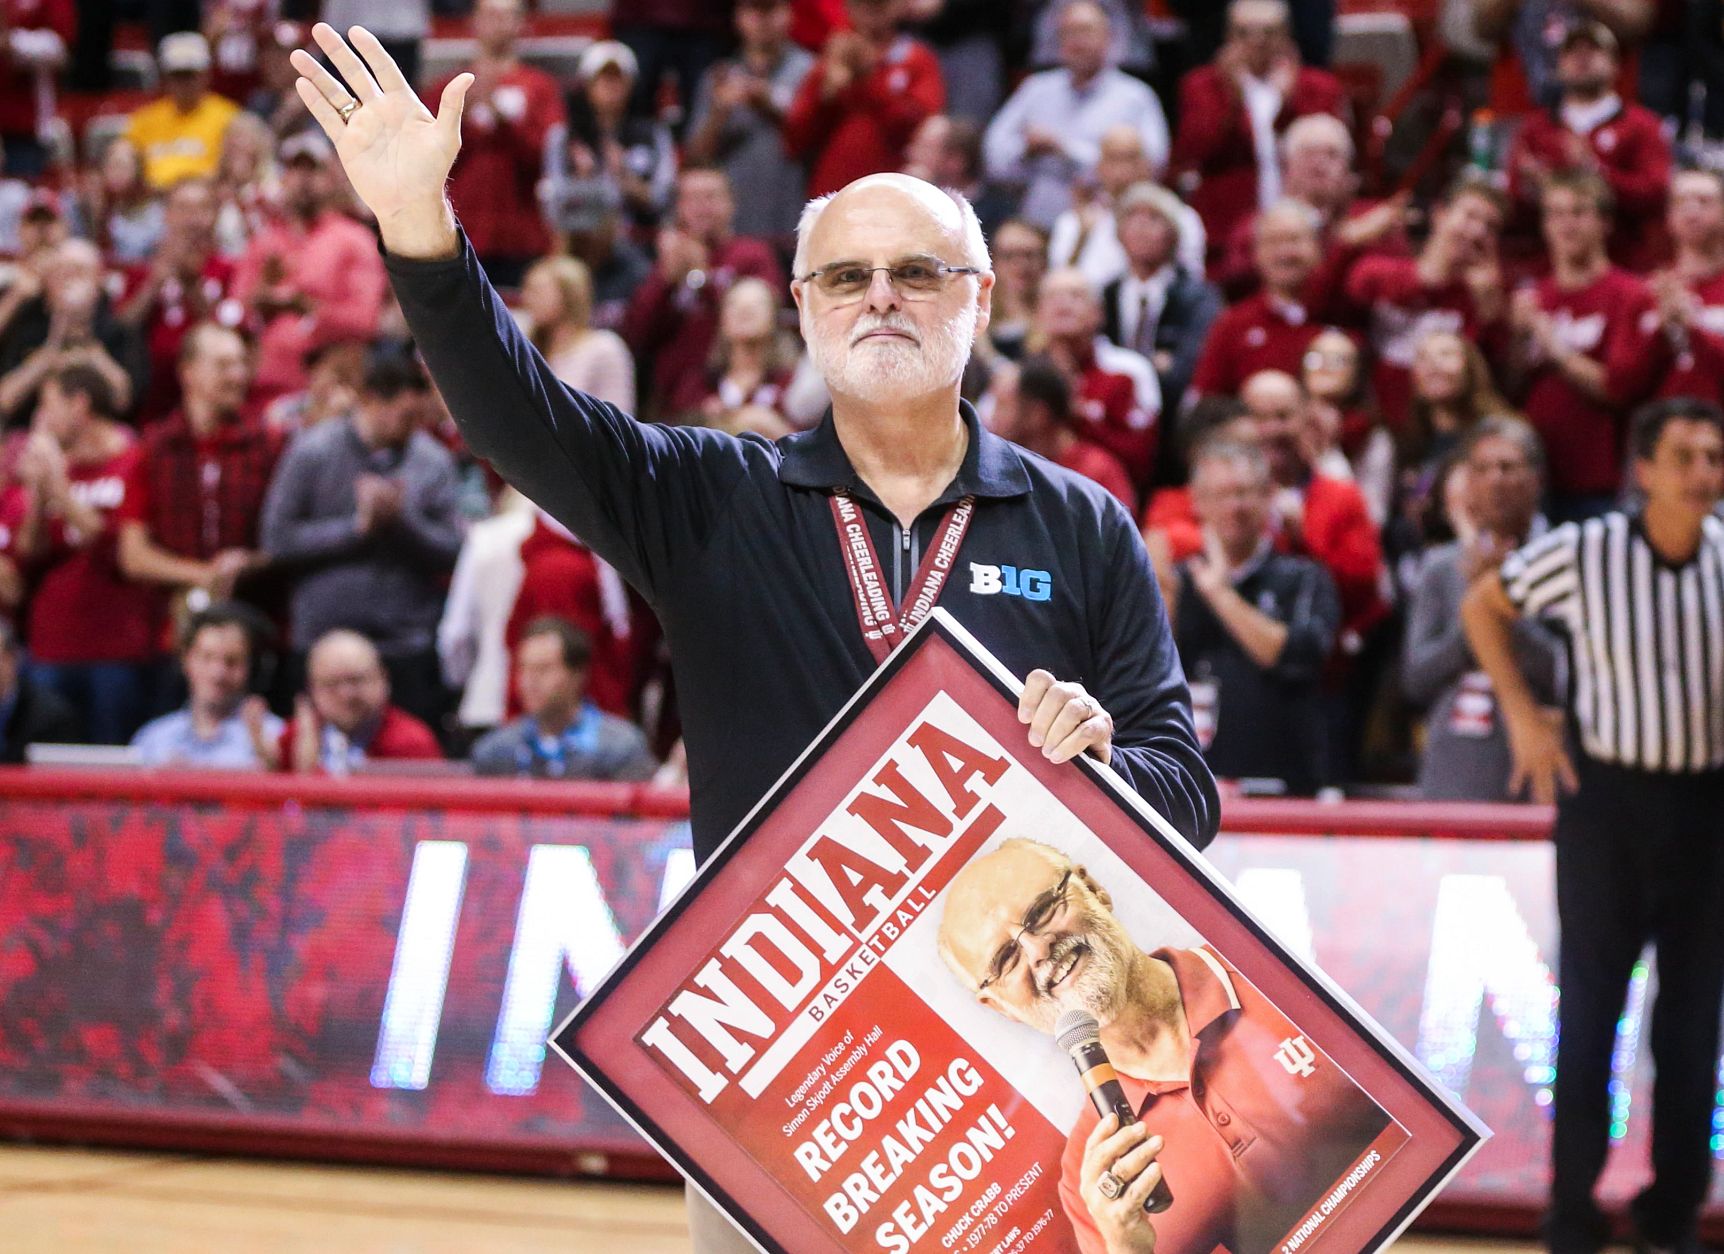 Chuck Crabb waves to a crowd as he holds a framed poster of himself